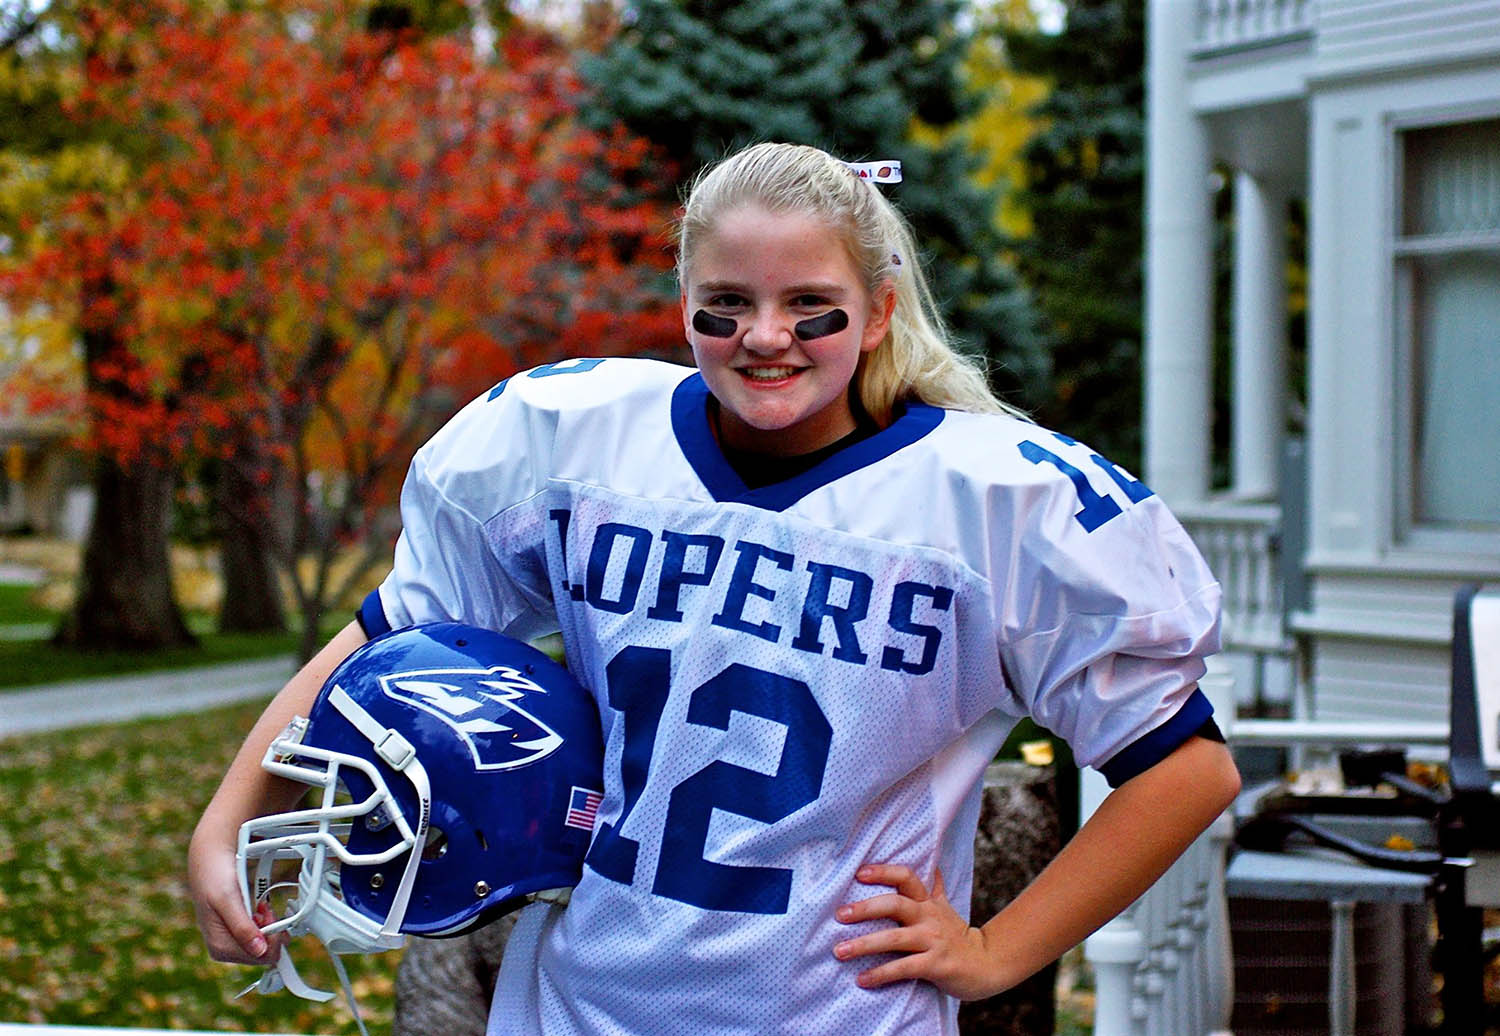 Paige Kristensen was a Loper fan long before she enrolled at UNK. Her Halloween costumes are proof.